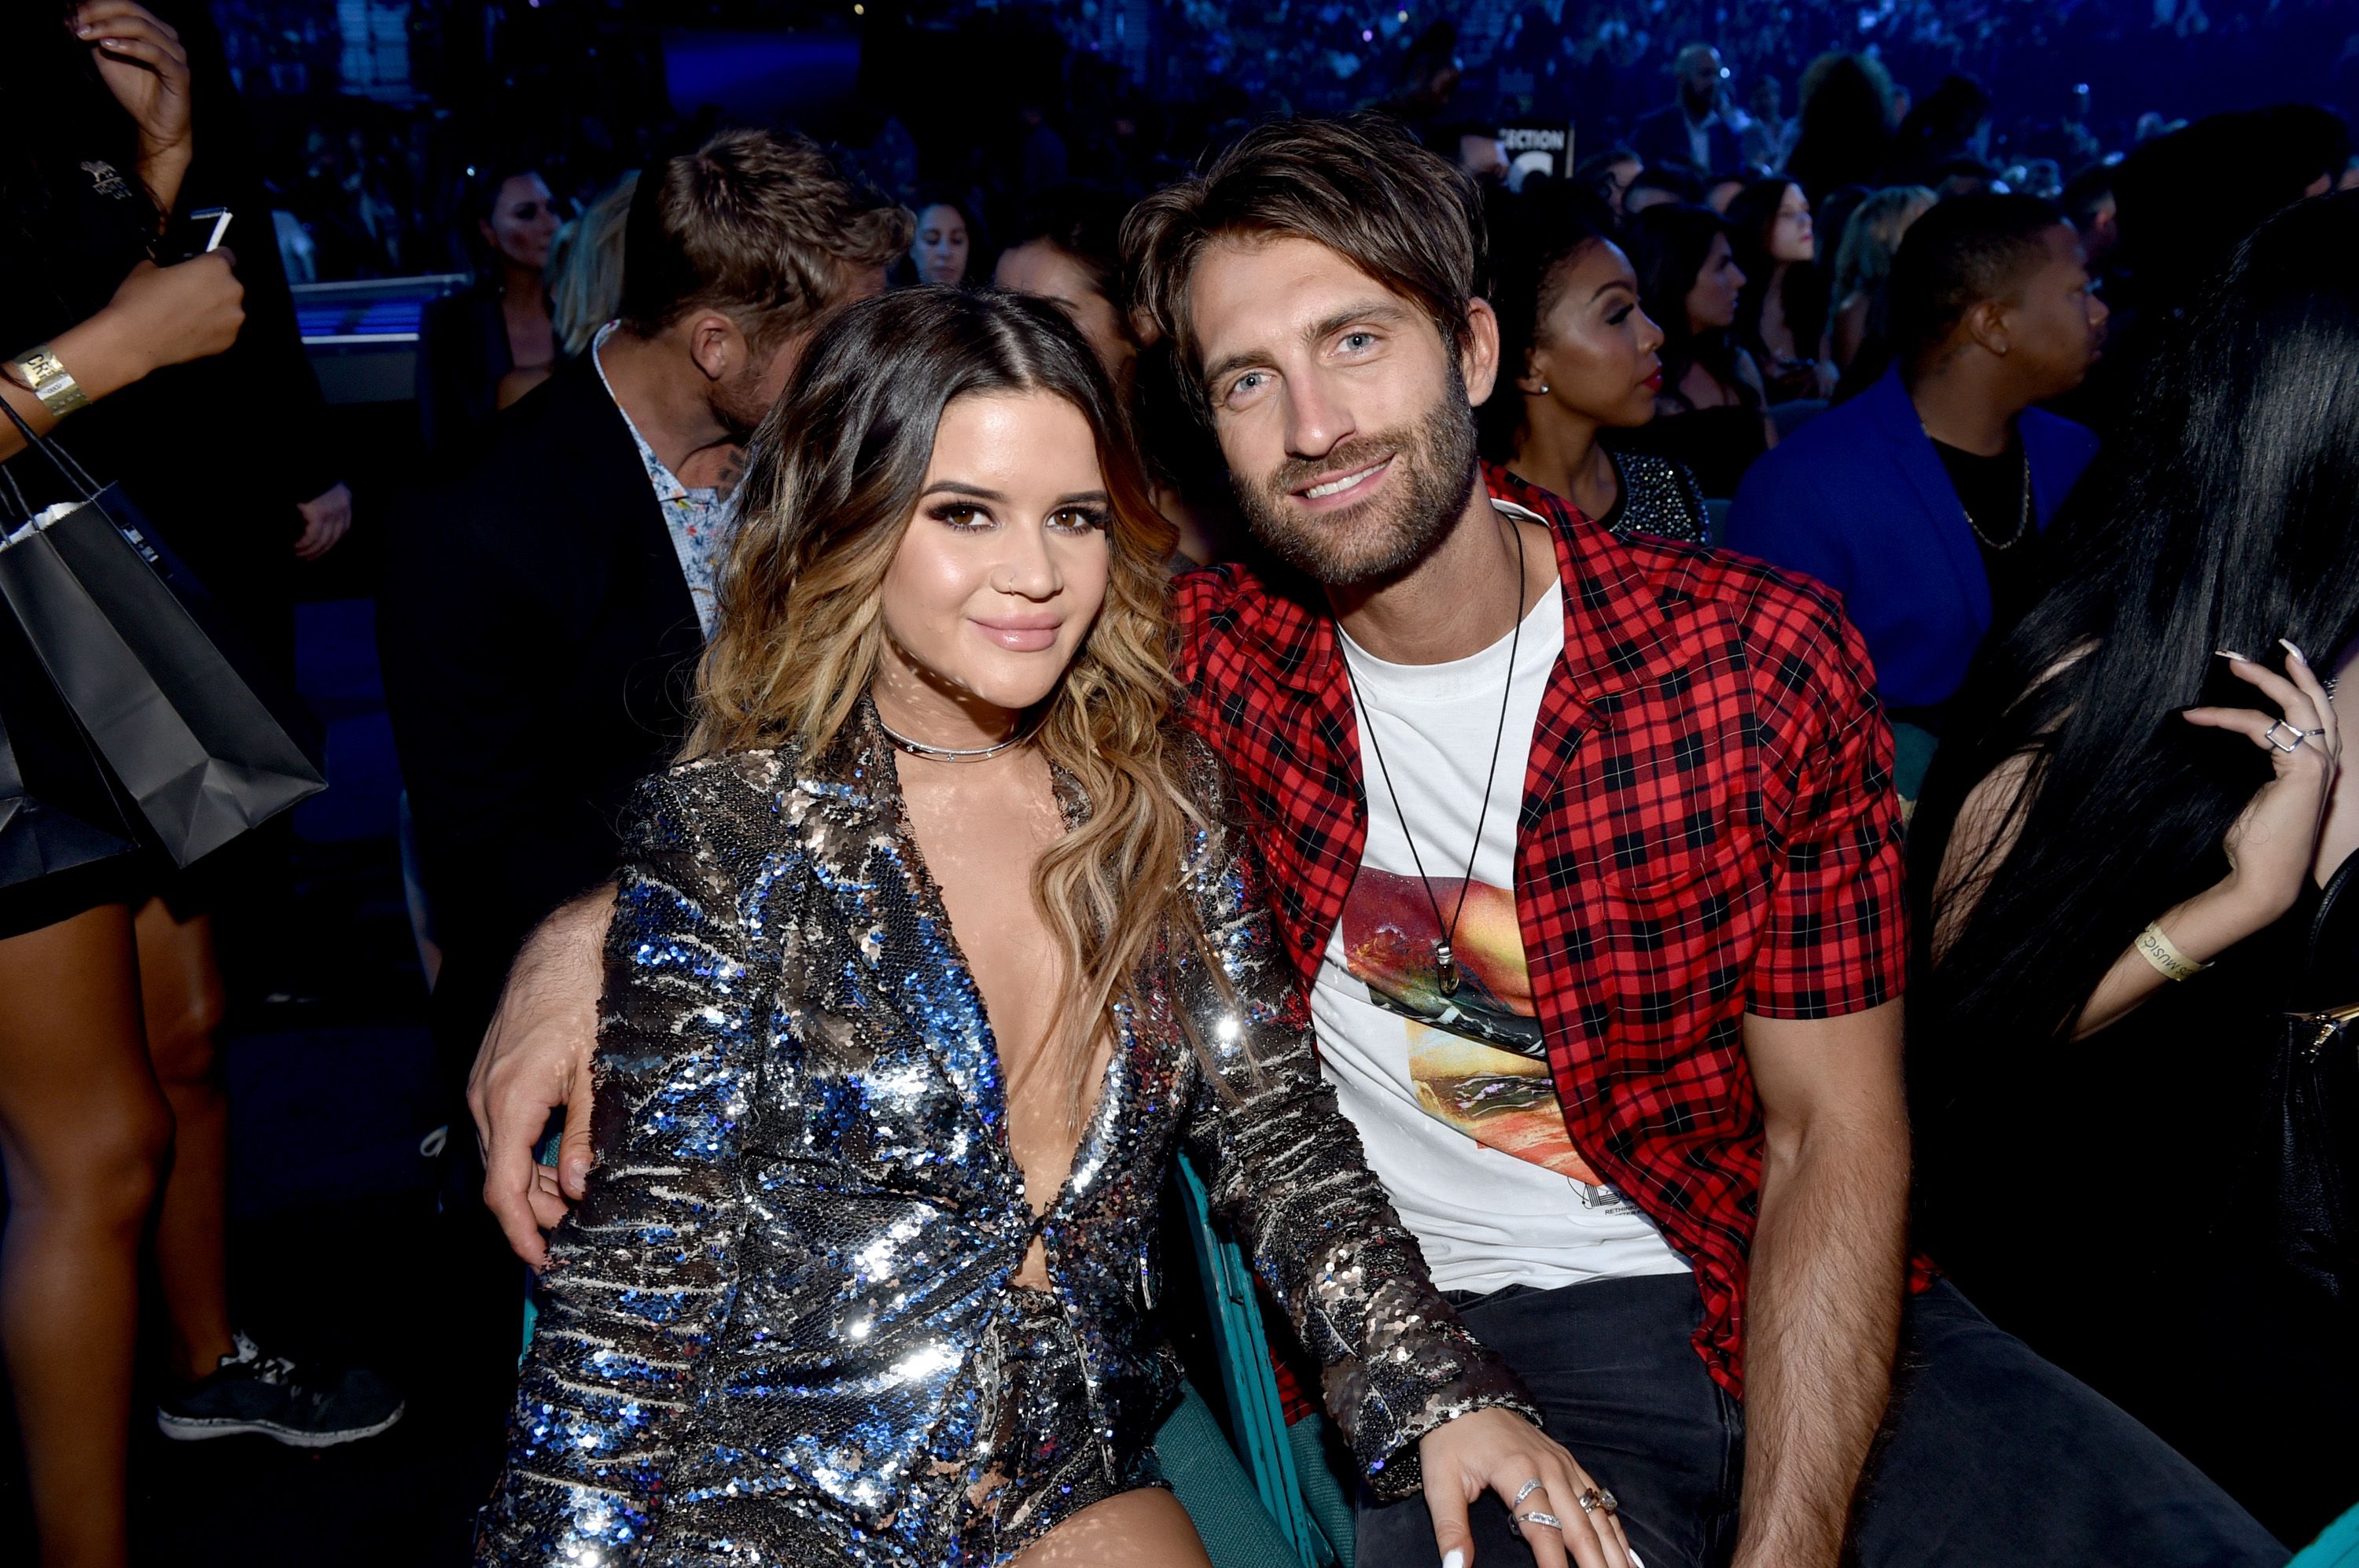 Maren Morris and Ryan Hurd during the 2018 Billboard Music Awards at MGM Grand Garden Arena on May 20, 2018 in Las Vegas, Nevada. | Source: Getty Images